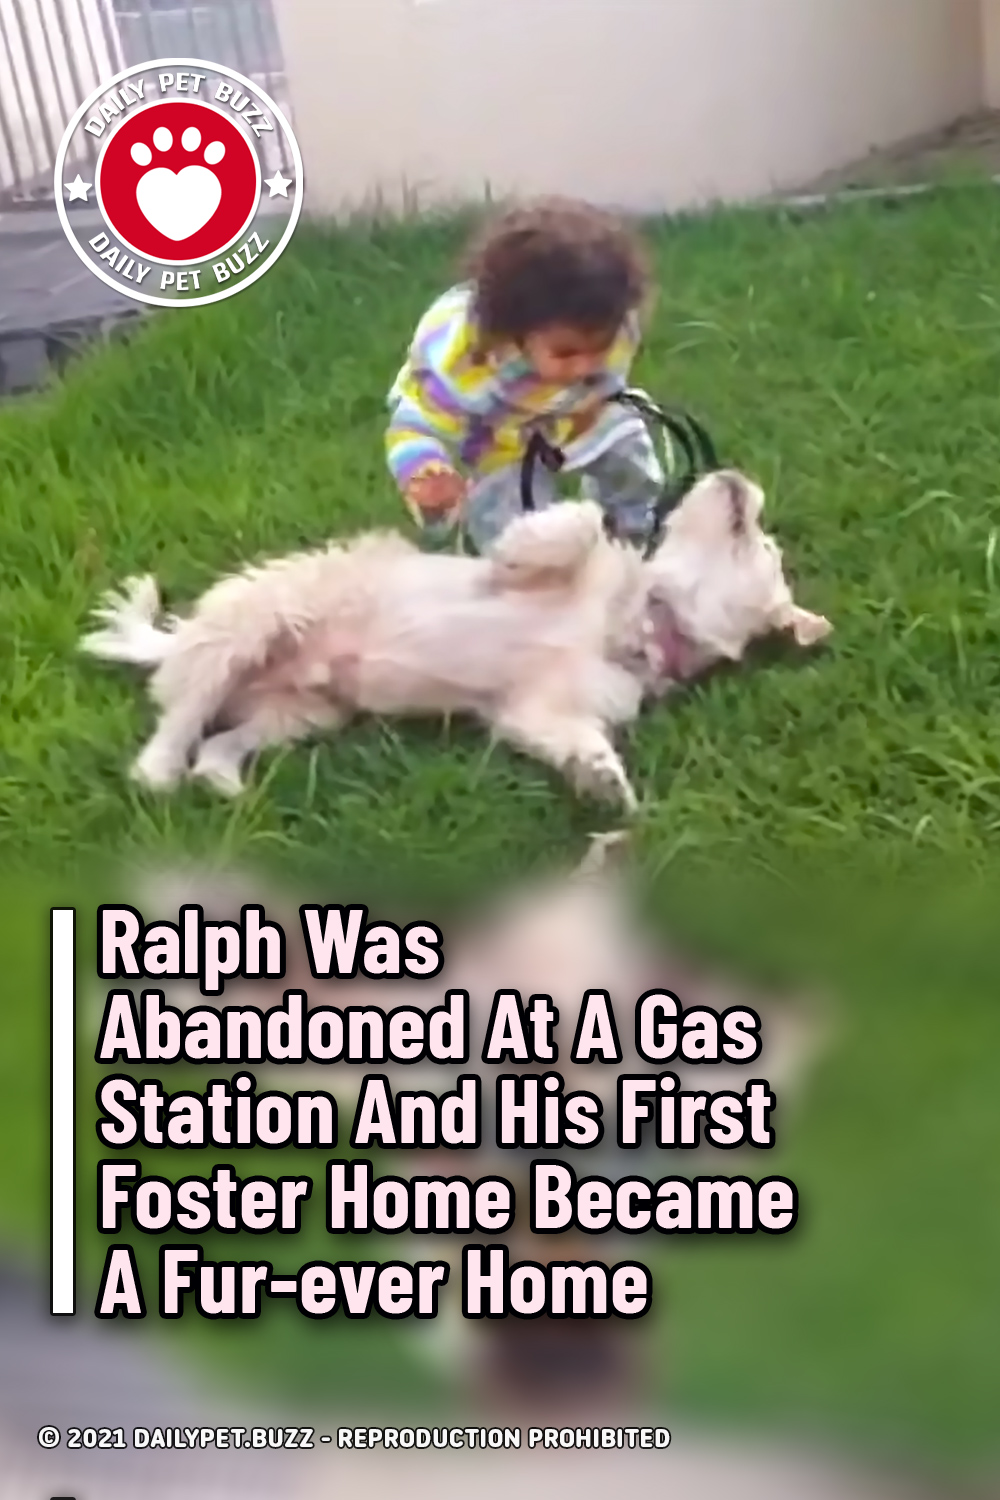 Ralph Was Abandoned At A Gas Station And His First Foster Home Became A Fur-ever Home